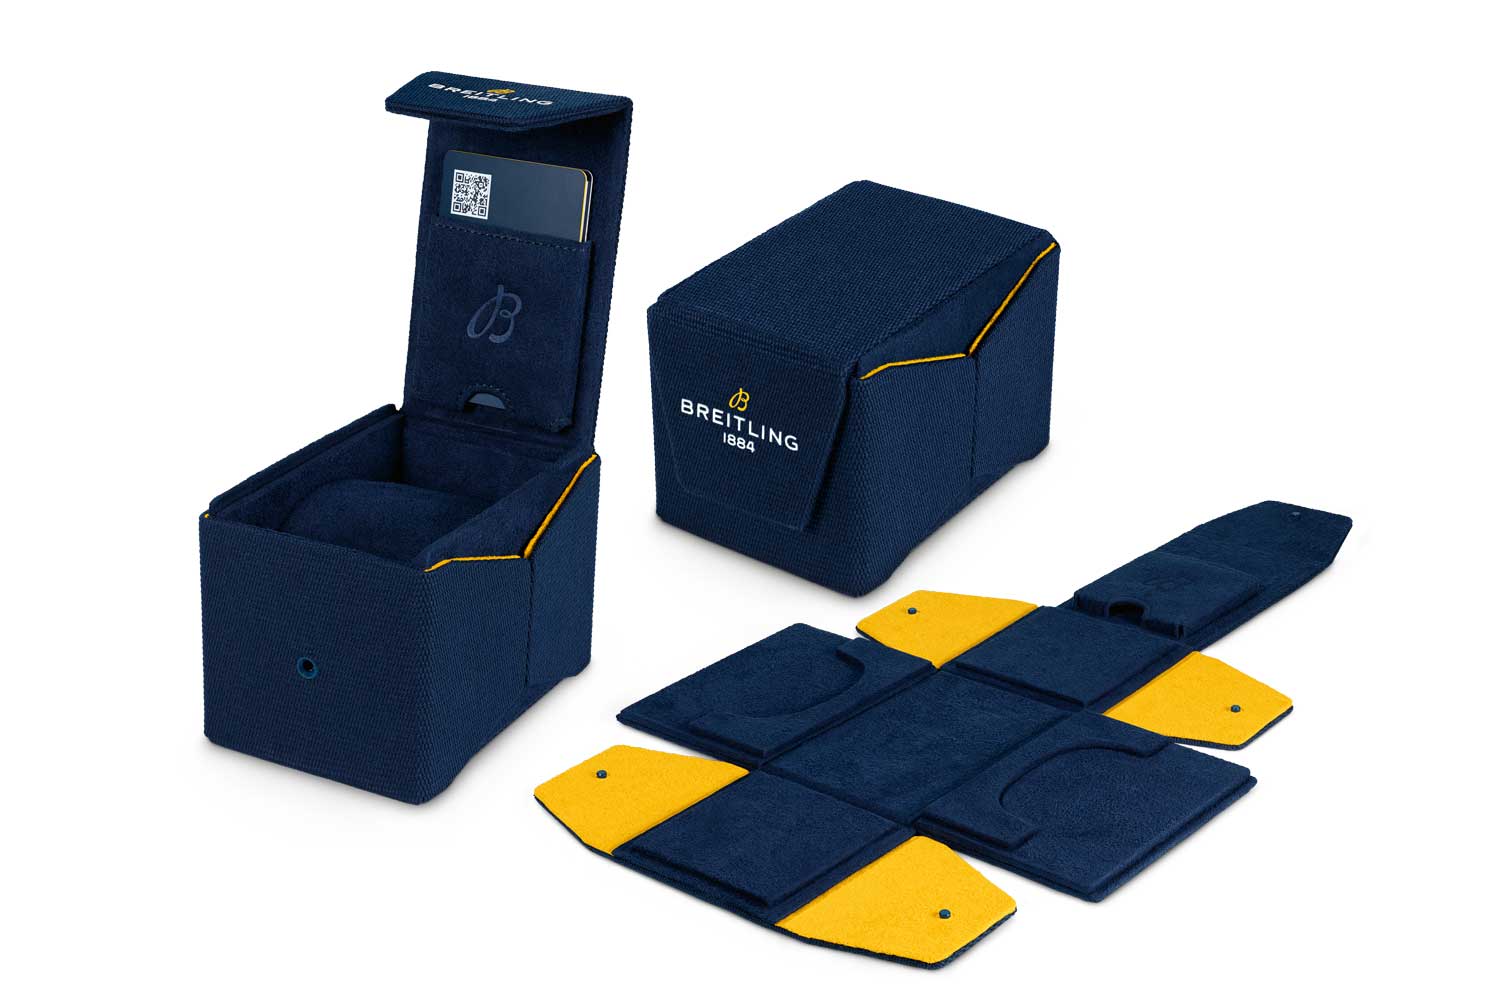 Breitling's flat-packed packaging is a less wasteful way forward